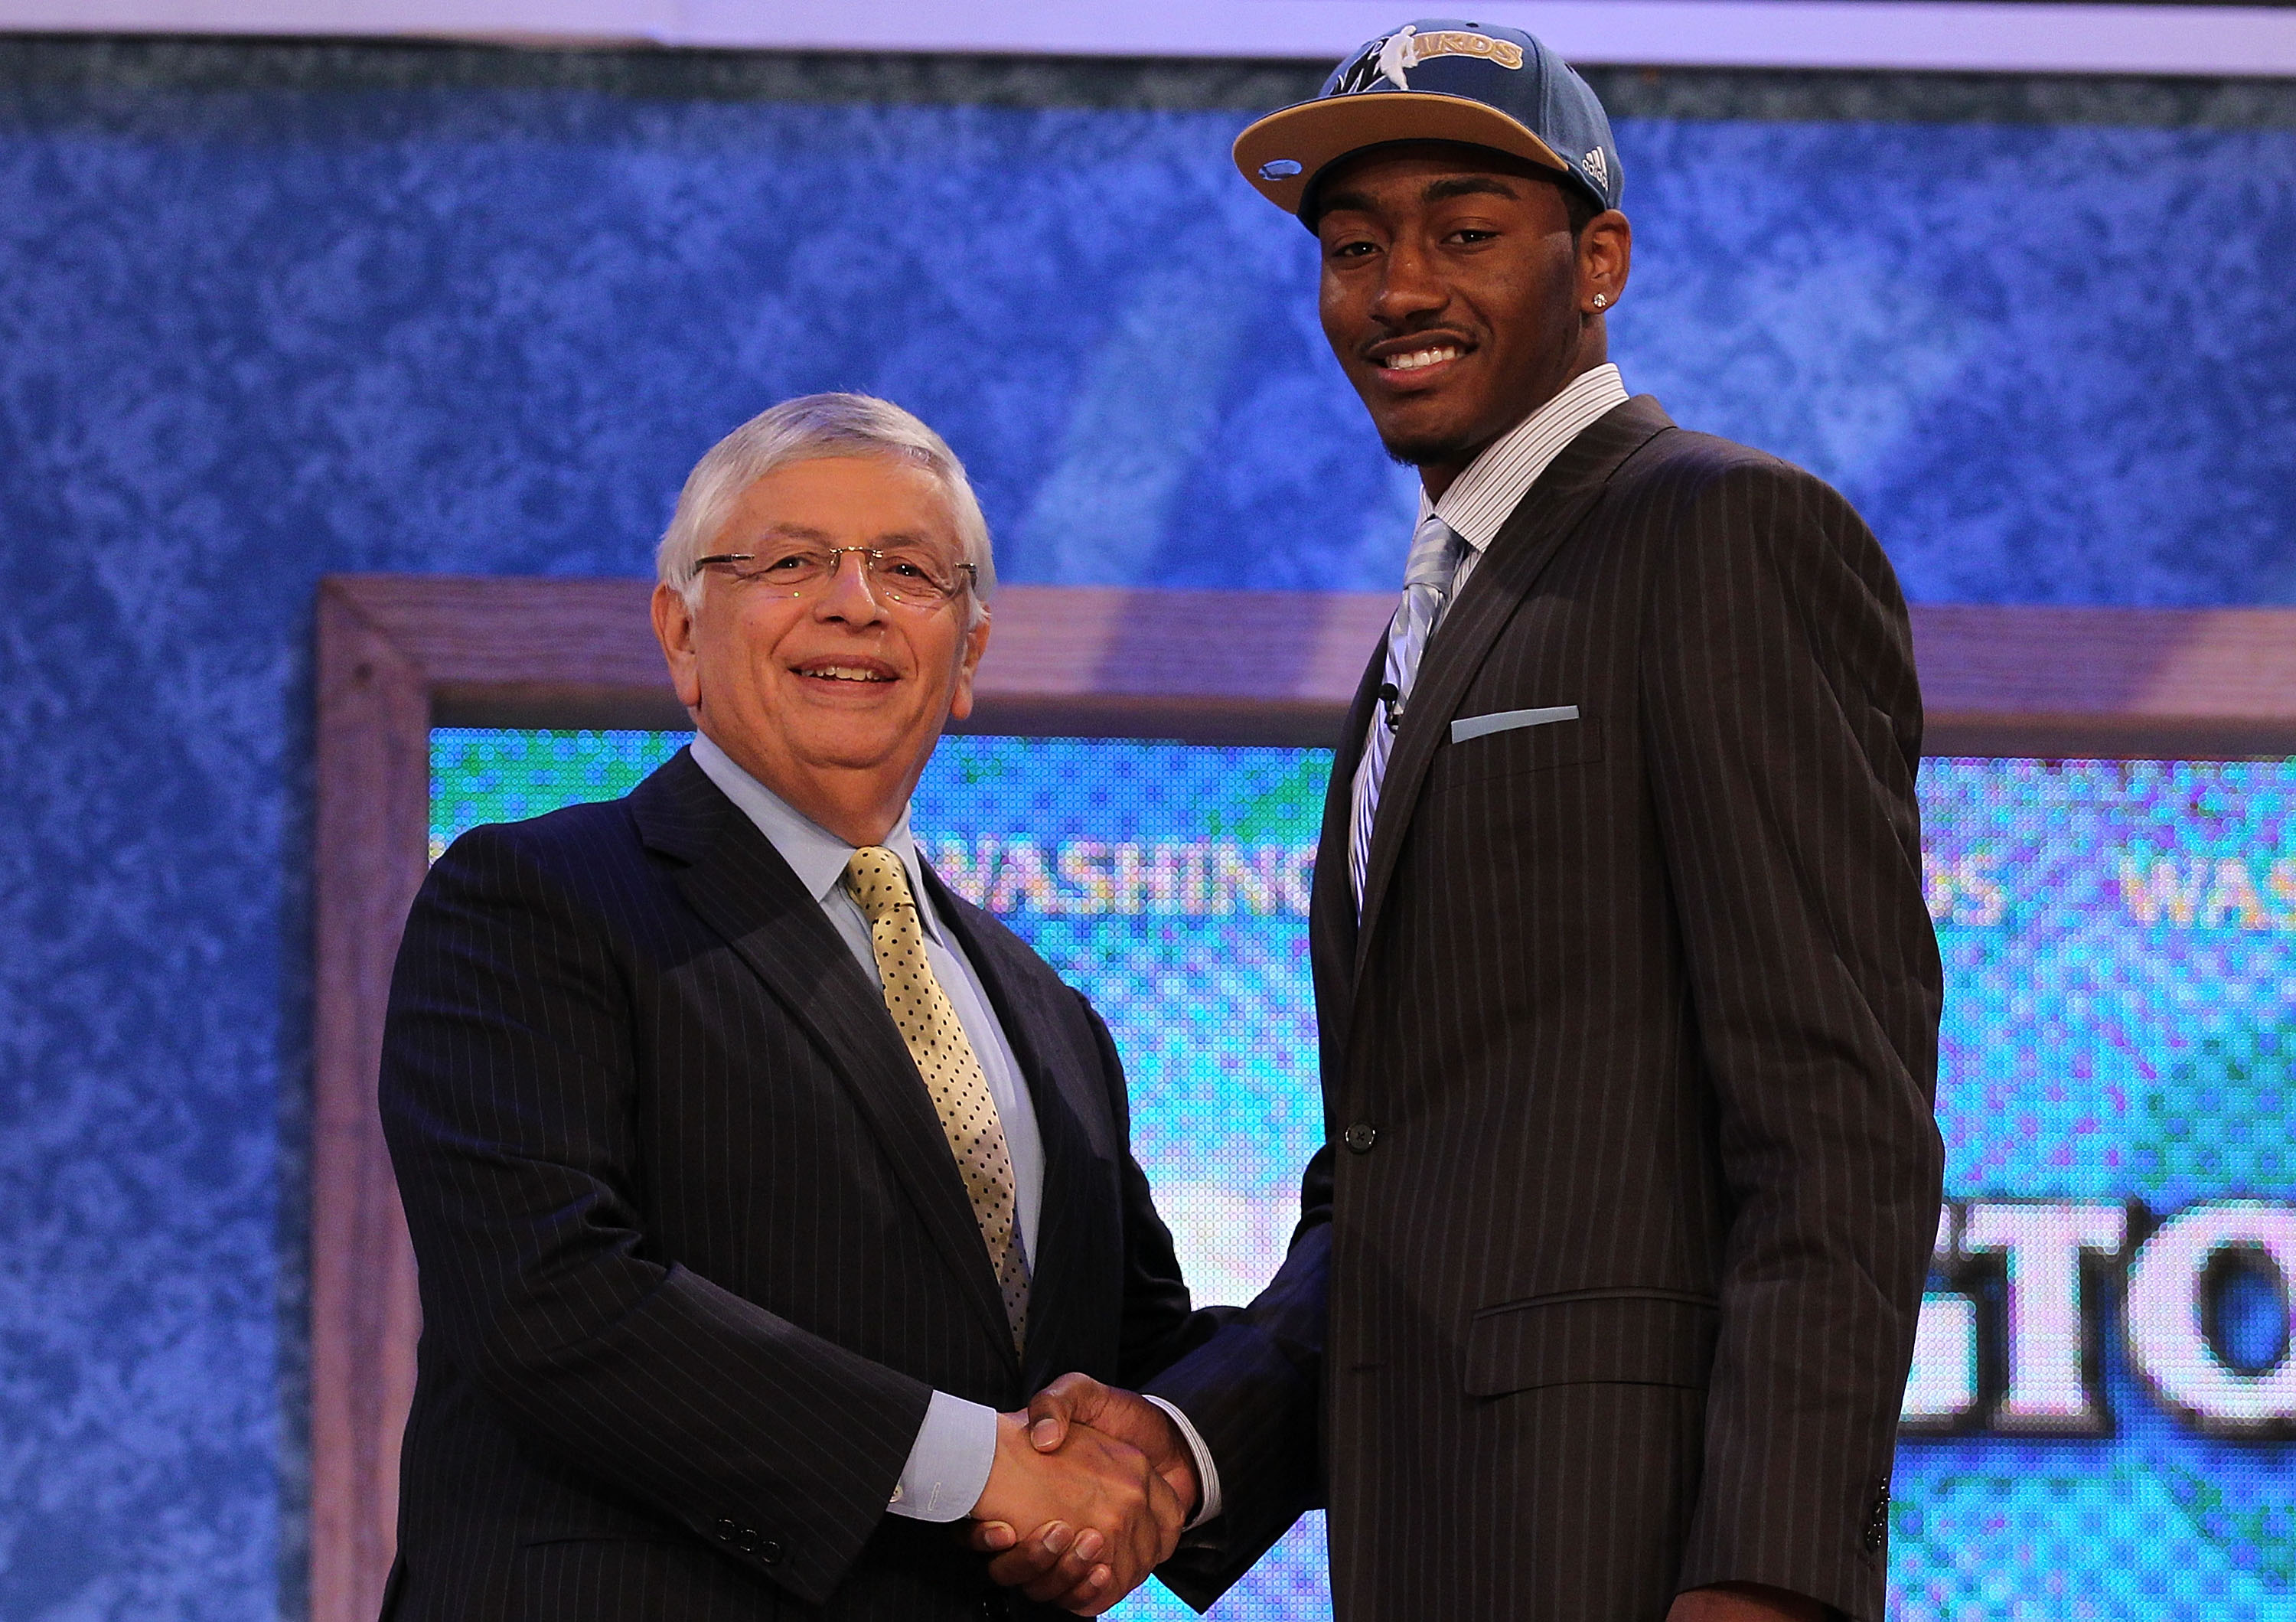 NEW YORK - JUNE 24:  John Wall of Kentucky stands with NBA Commisioner David Stern after being drafted with the first pick by the Washington Wizards at Madison Square Garden on June 24, 2010 in New York City.  NOTE TO USER: User expressly acknowledges and